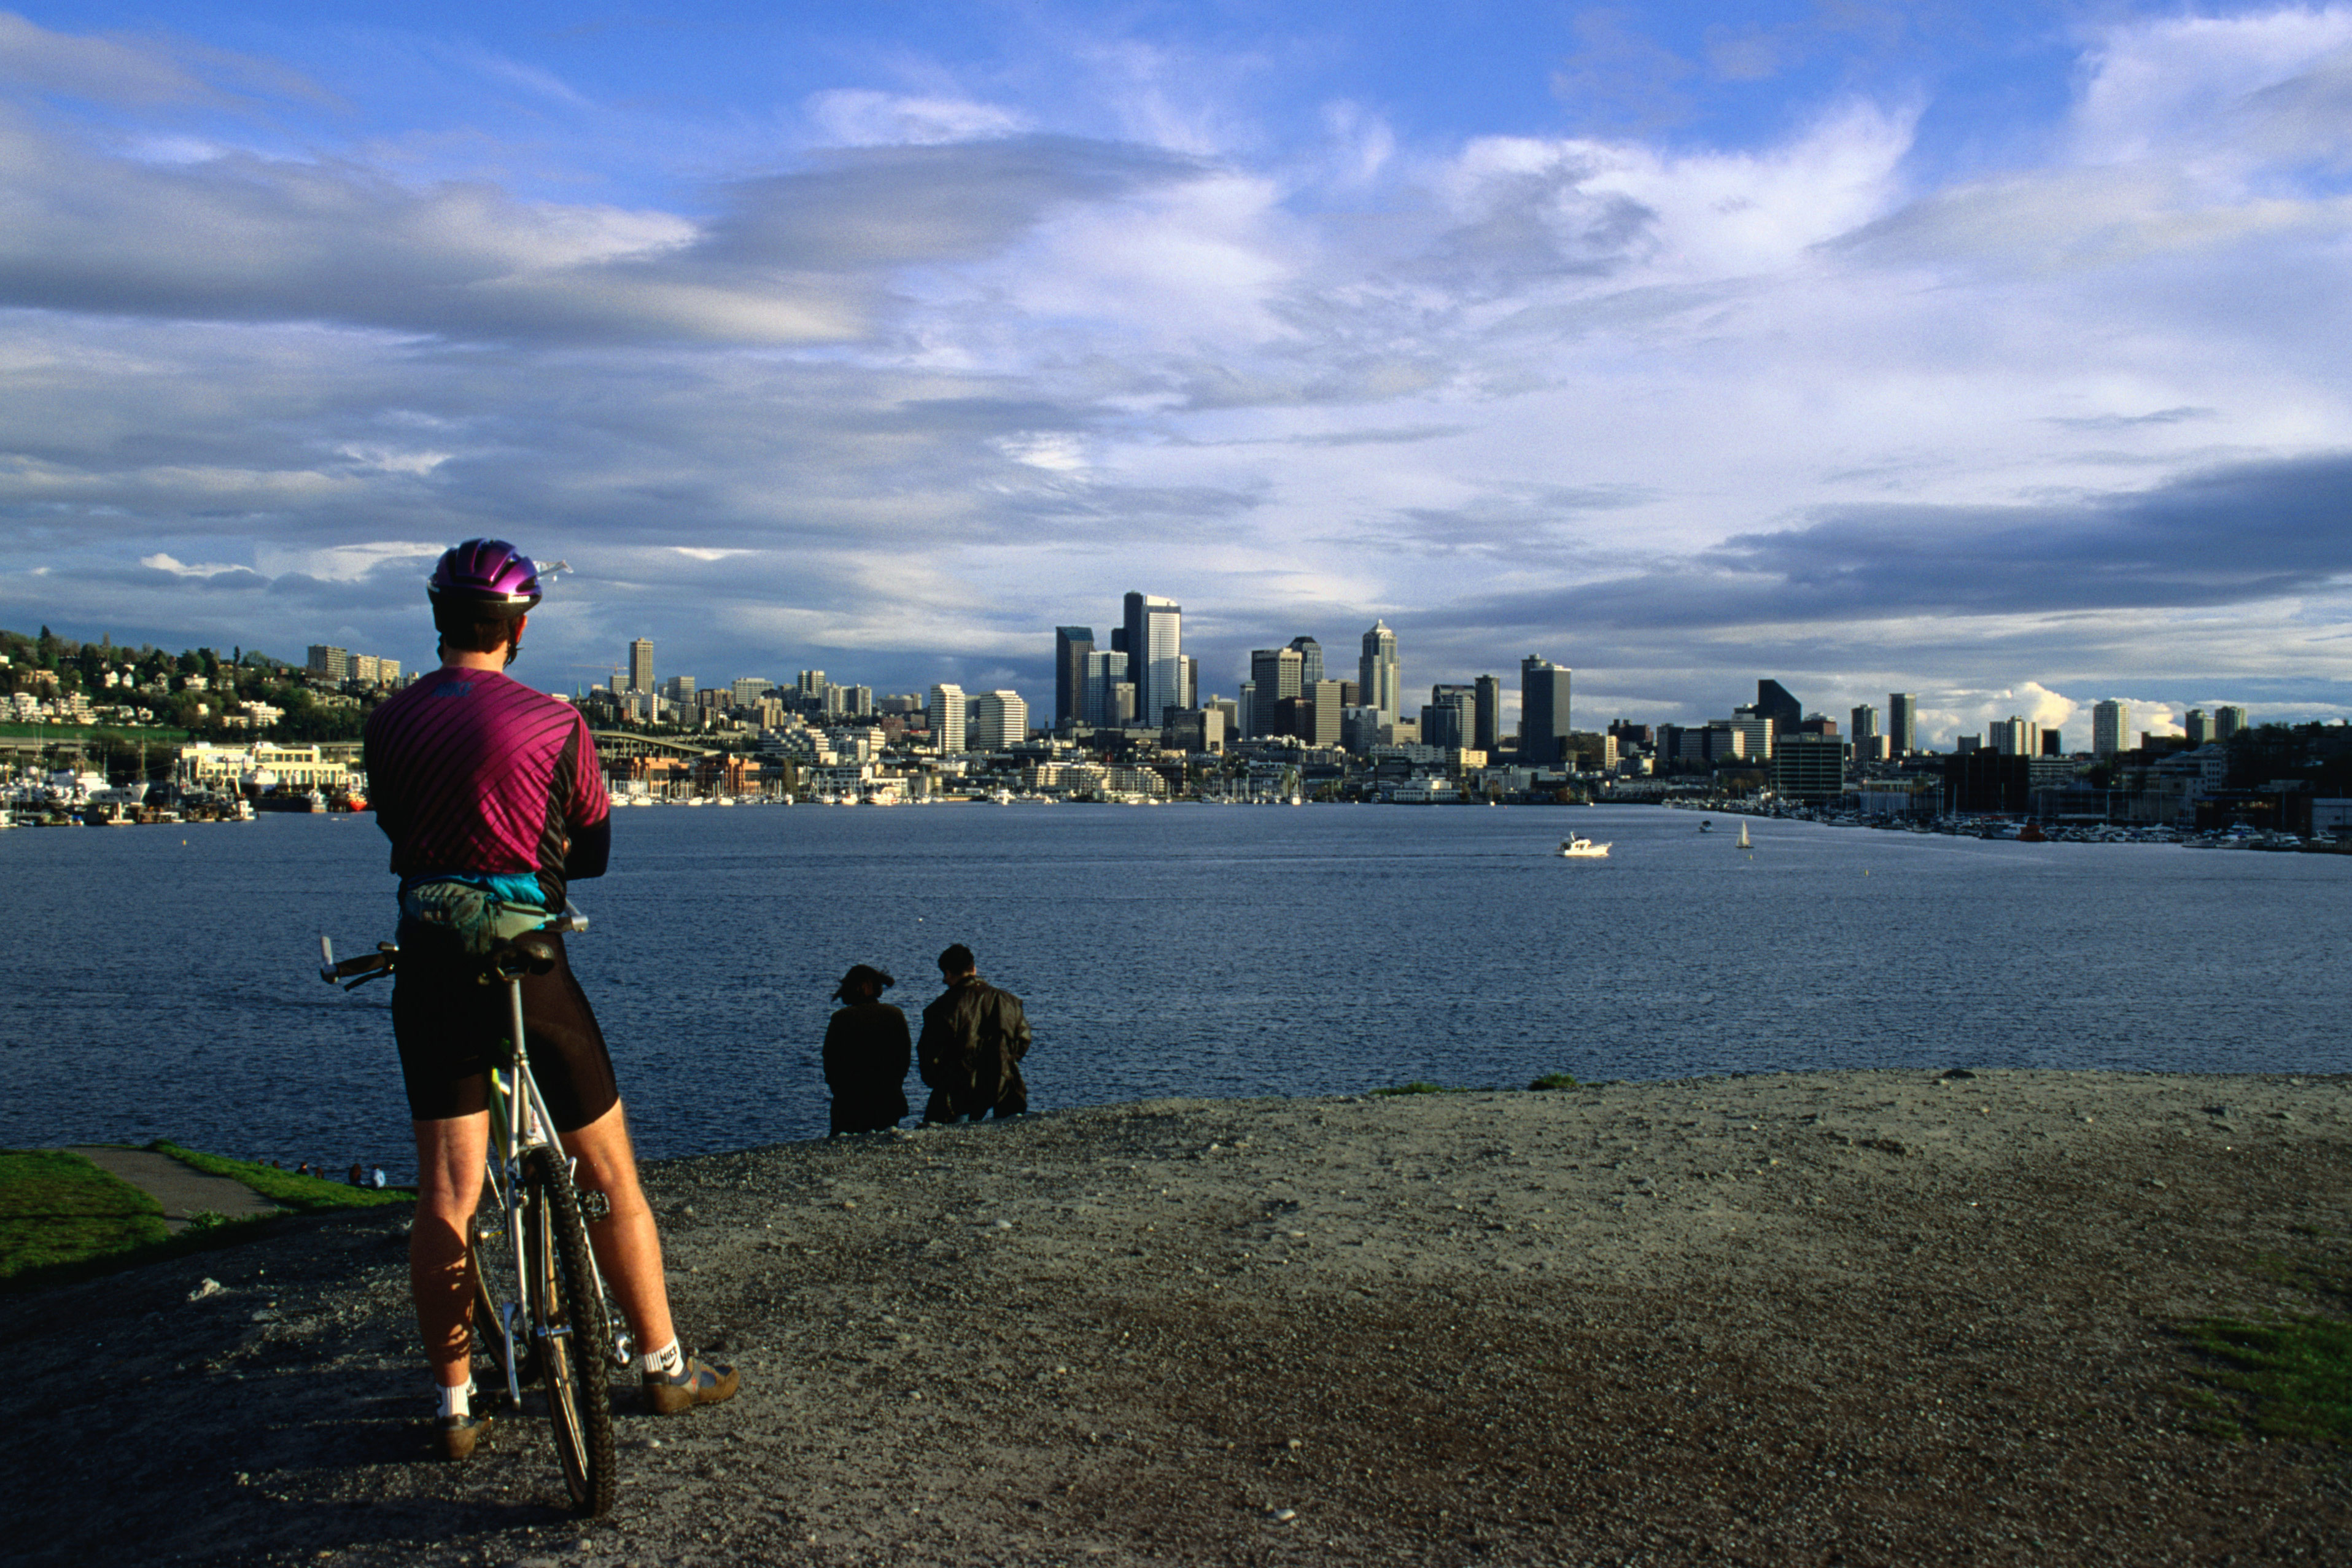 A cyclist takes a break to enjoy the view. Image by Ann Cecil / Getty